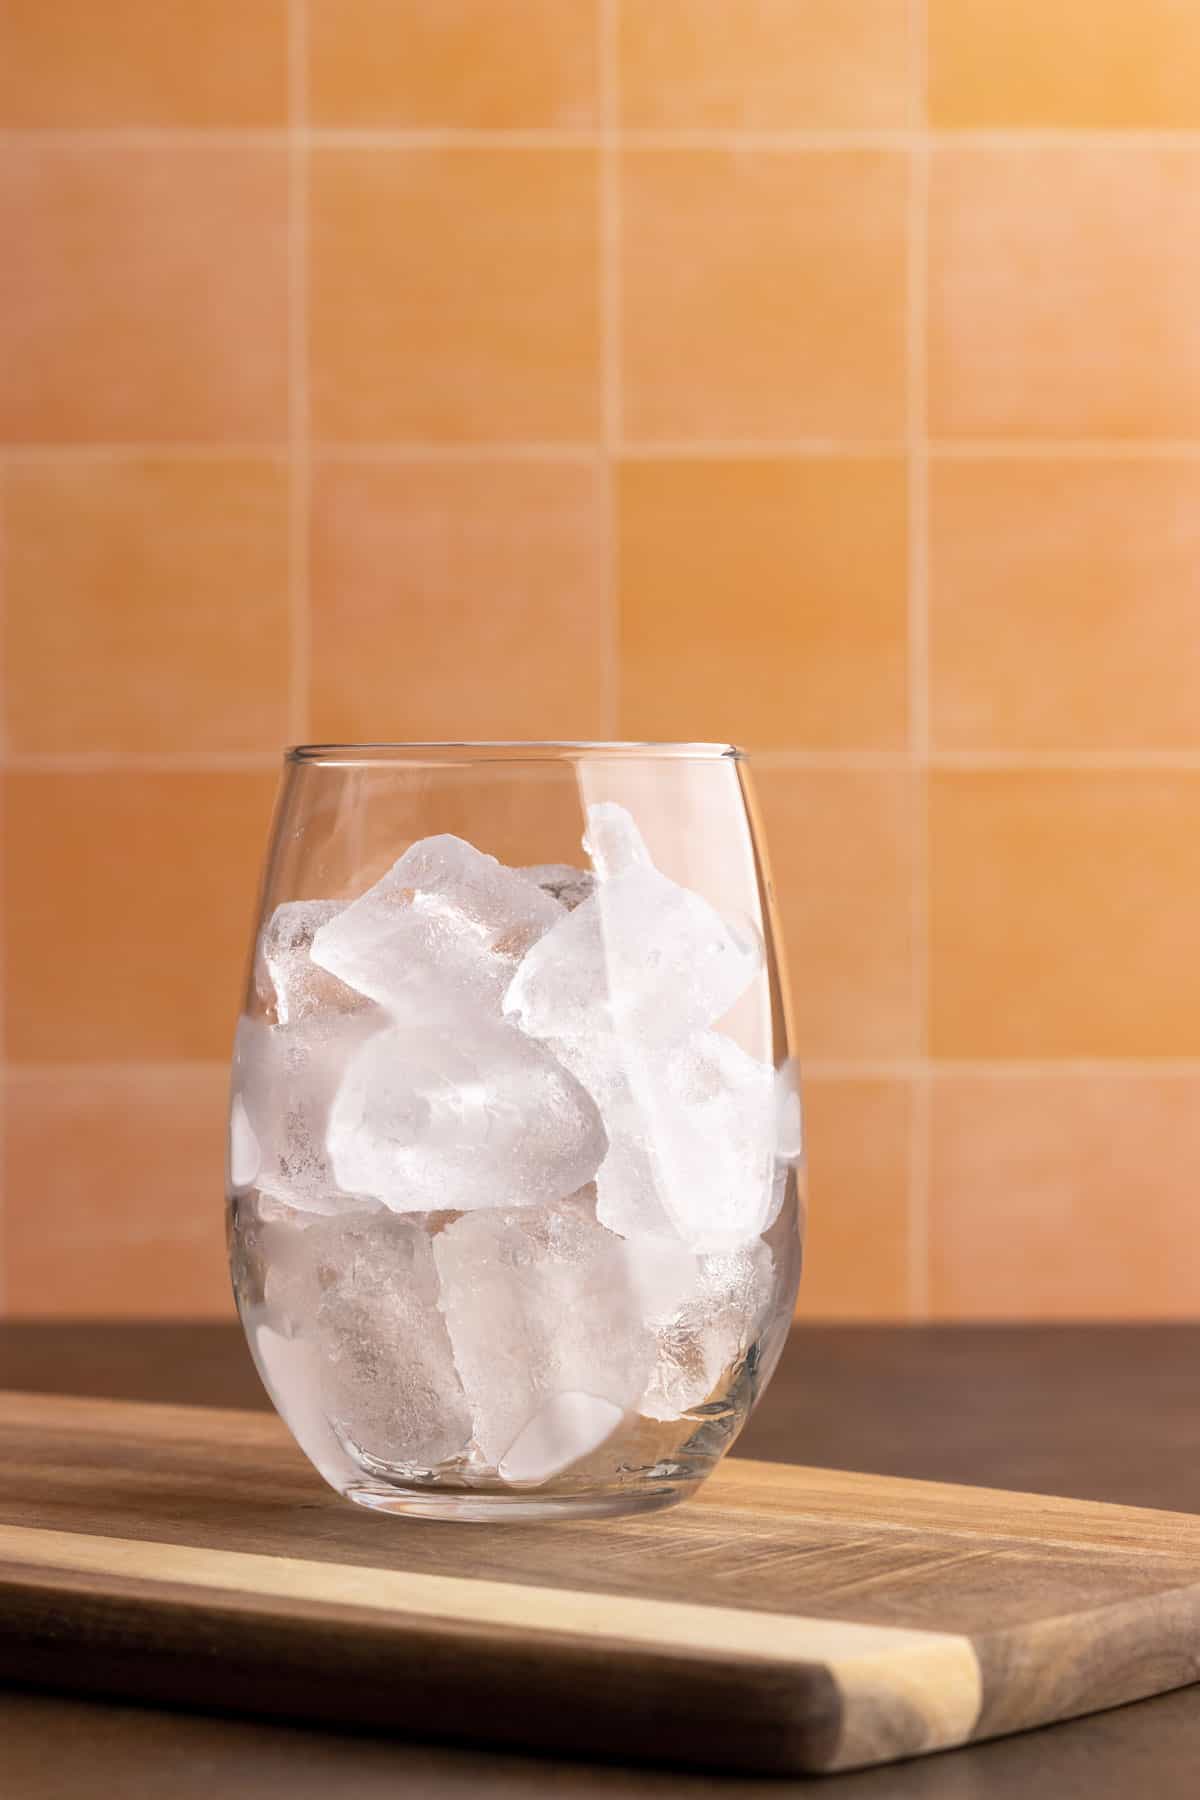 Glass filled with ice cubes.